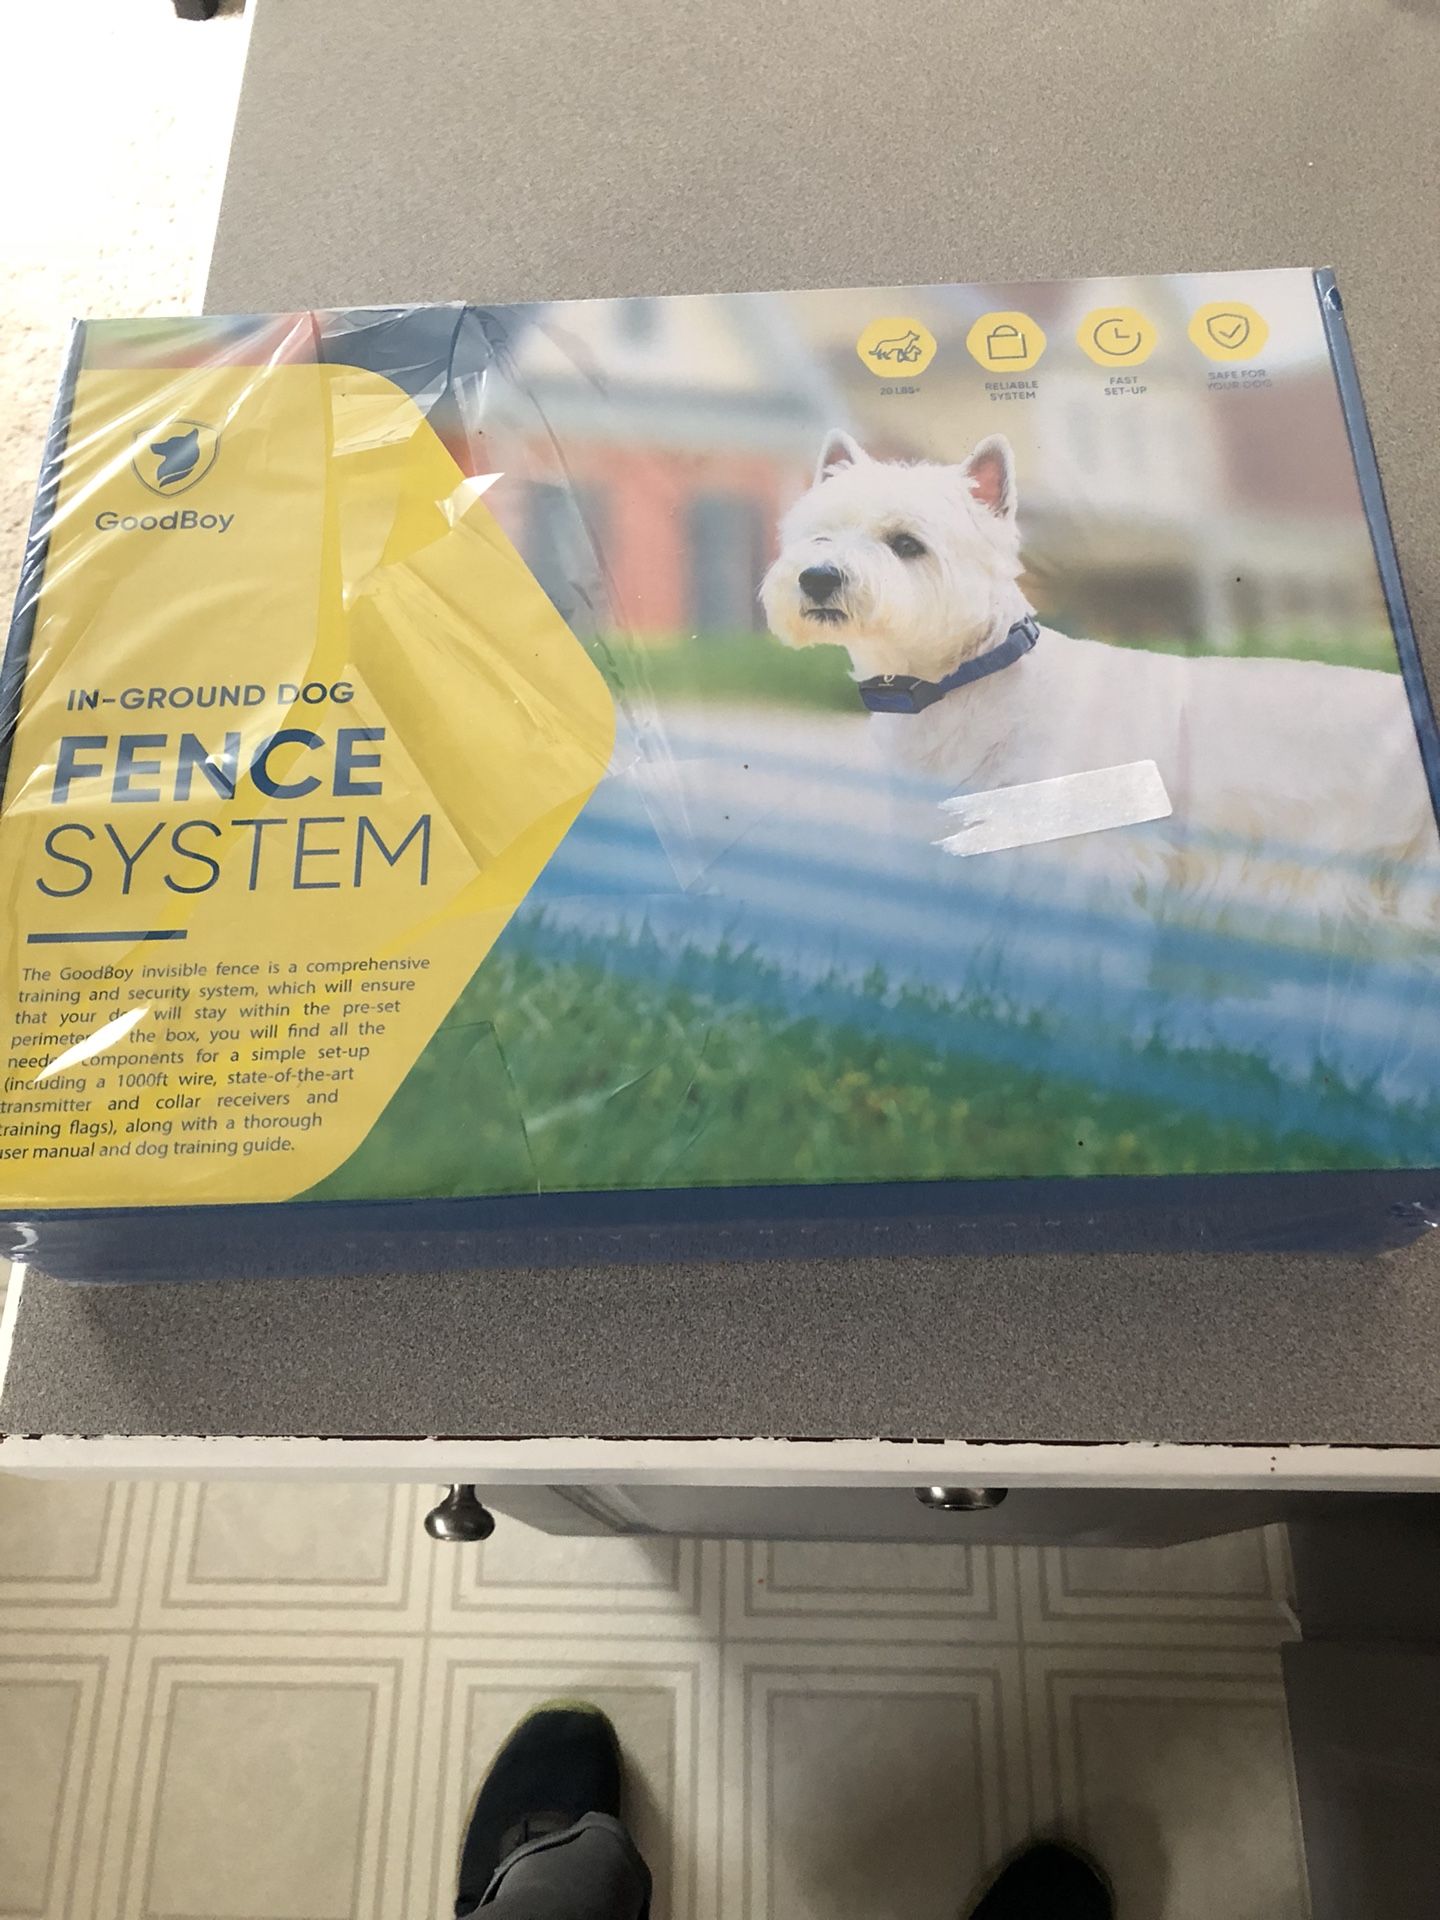 Fence system for dogs